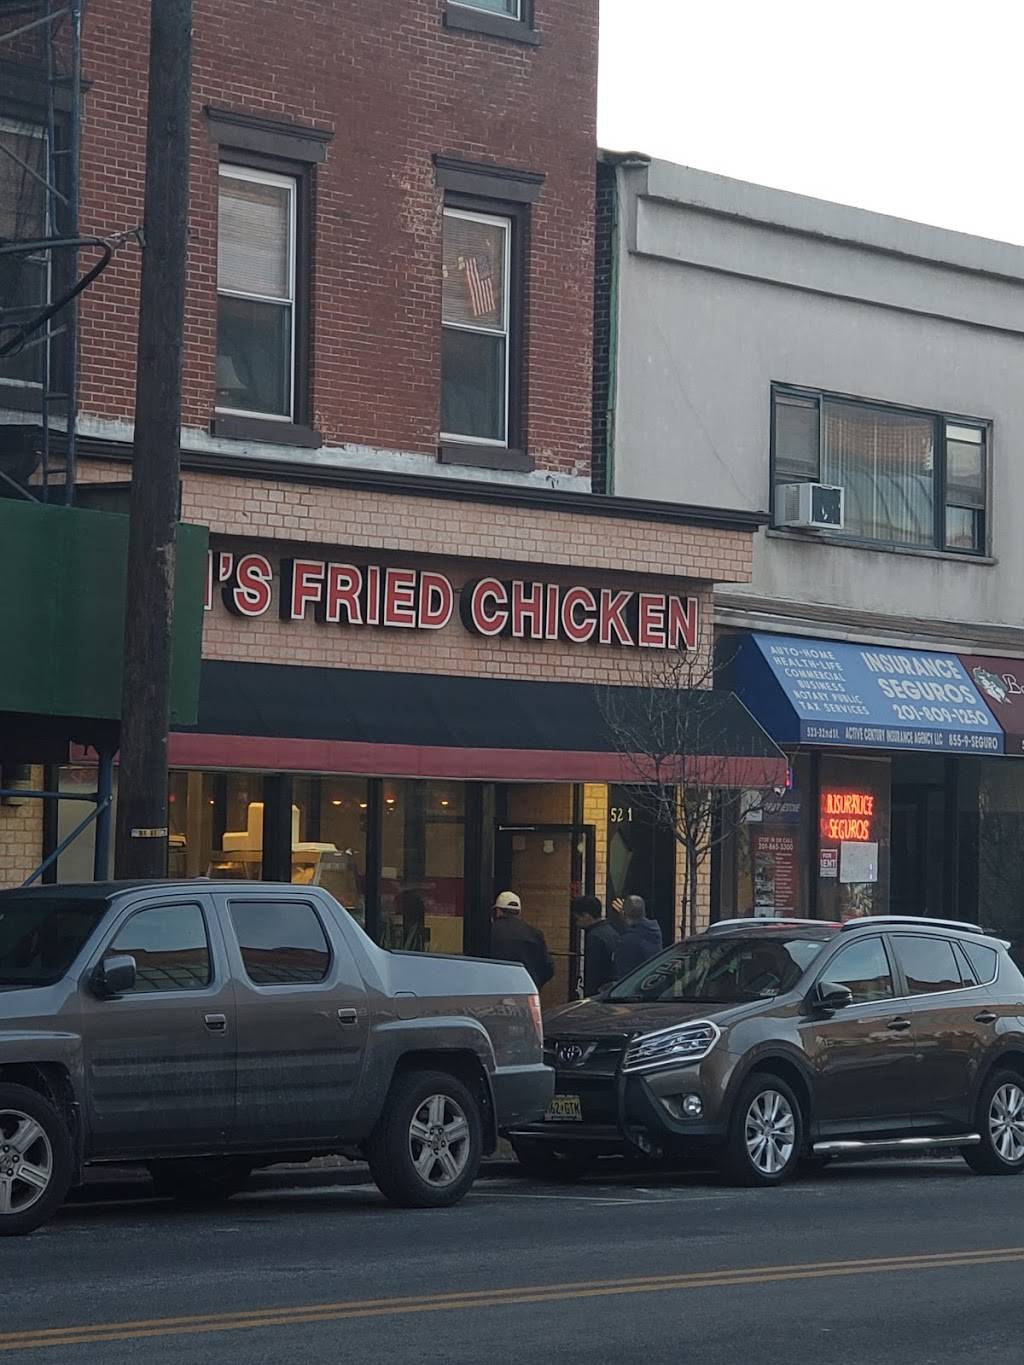 Johns Fried Chicken | restaurant | 521 32nd St, Union City, NJ 07087, USA | 2013309200 OR +1 201-330-9200